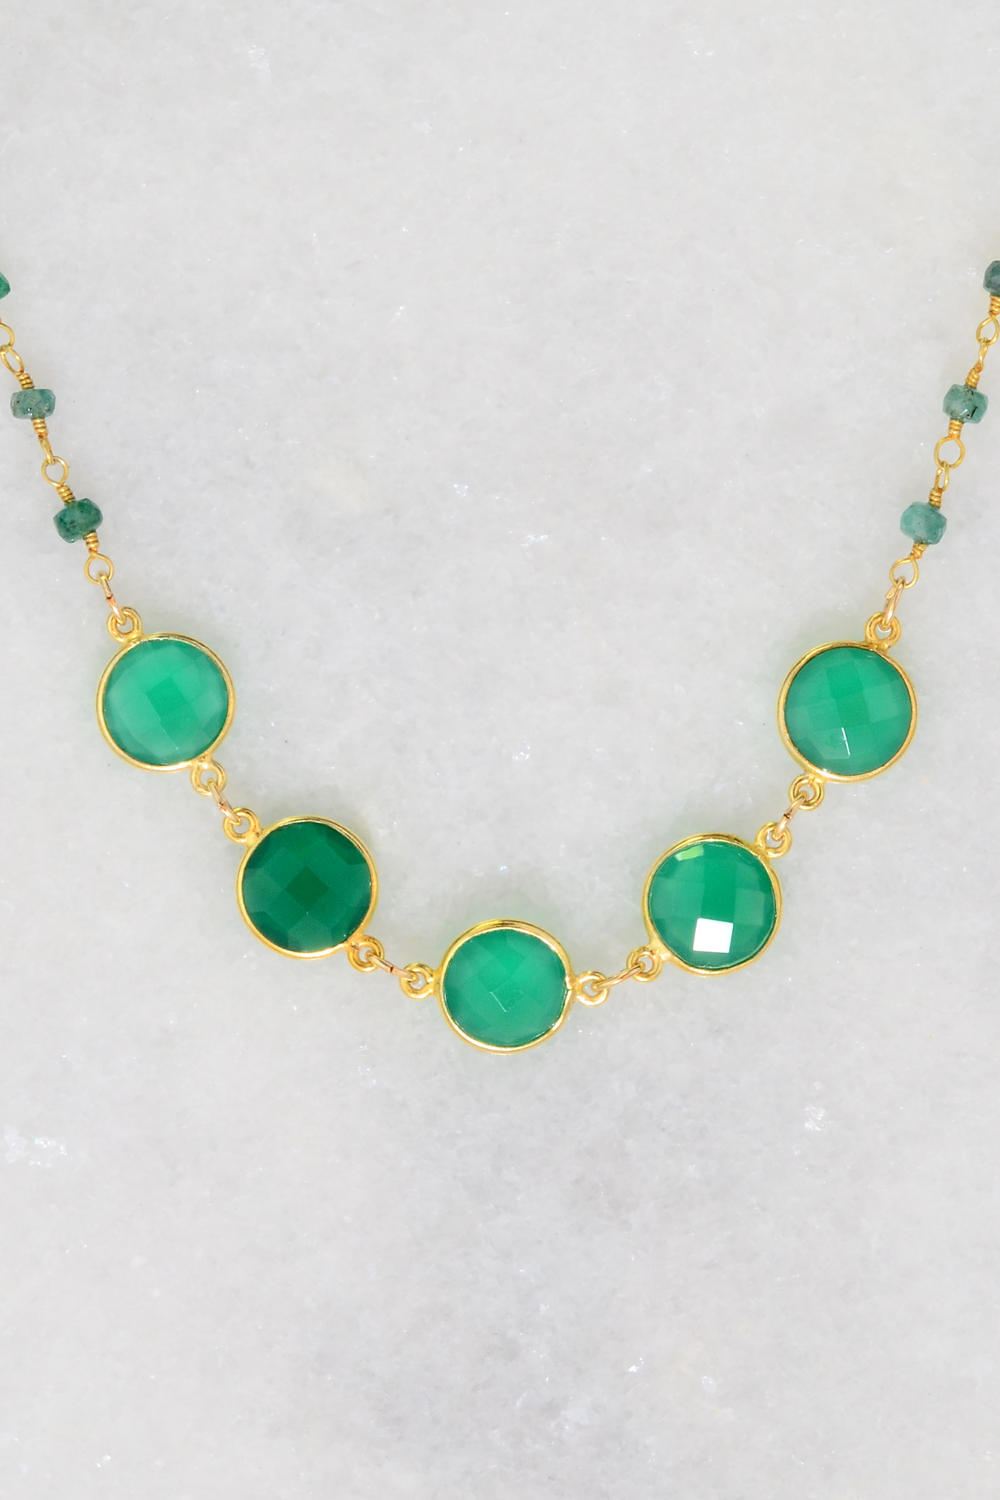 Emerald Green Necklace - Gemstone Necklace - May Birthstone Necklace - Mother's Necklace - Gift for mom - Bridesmaid Gift - Mothers Day Gift